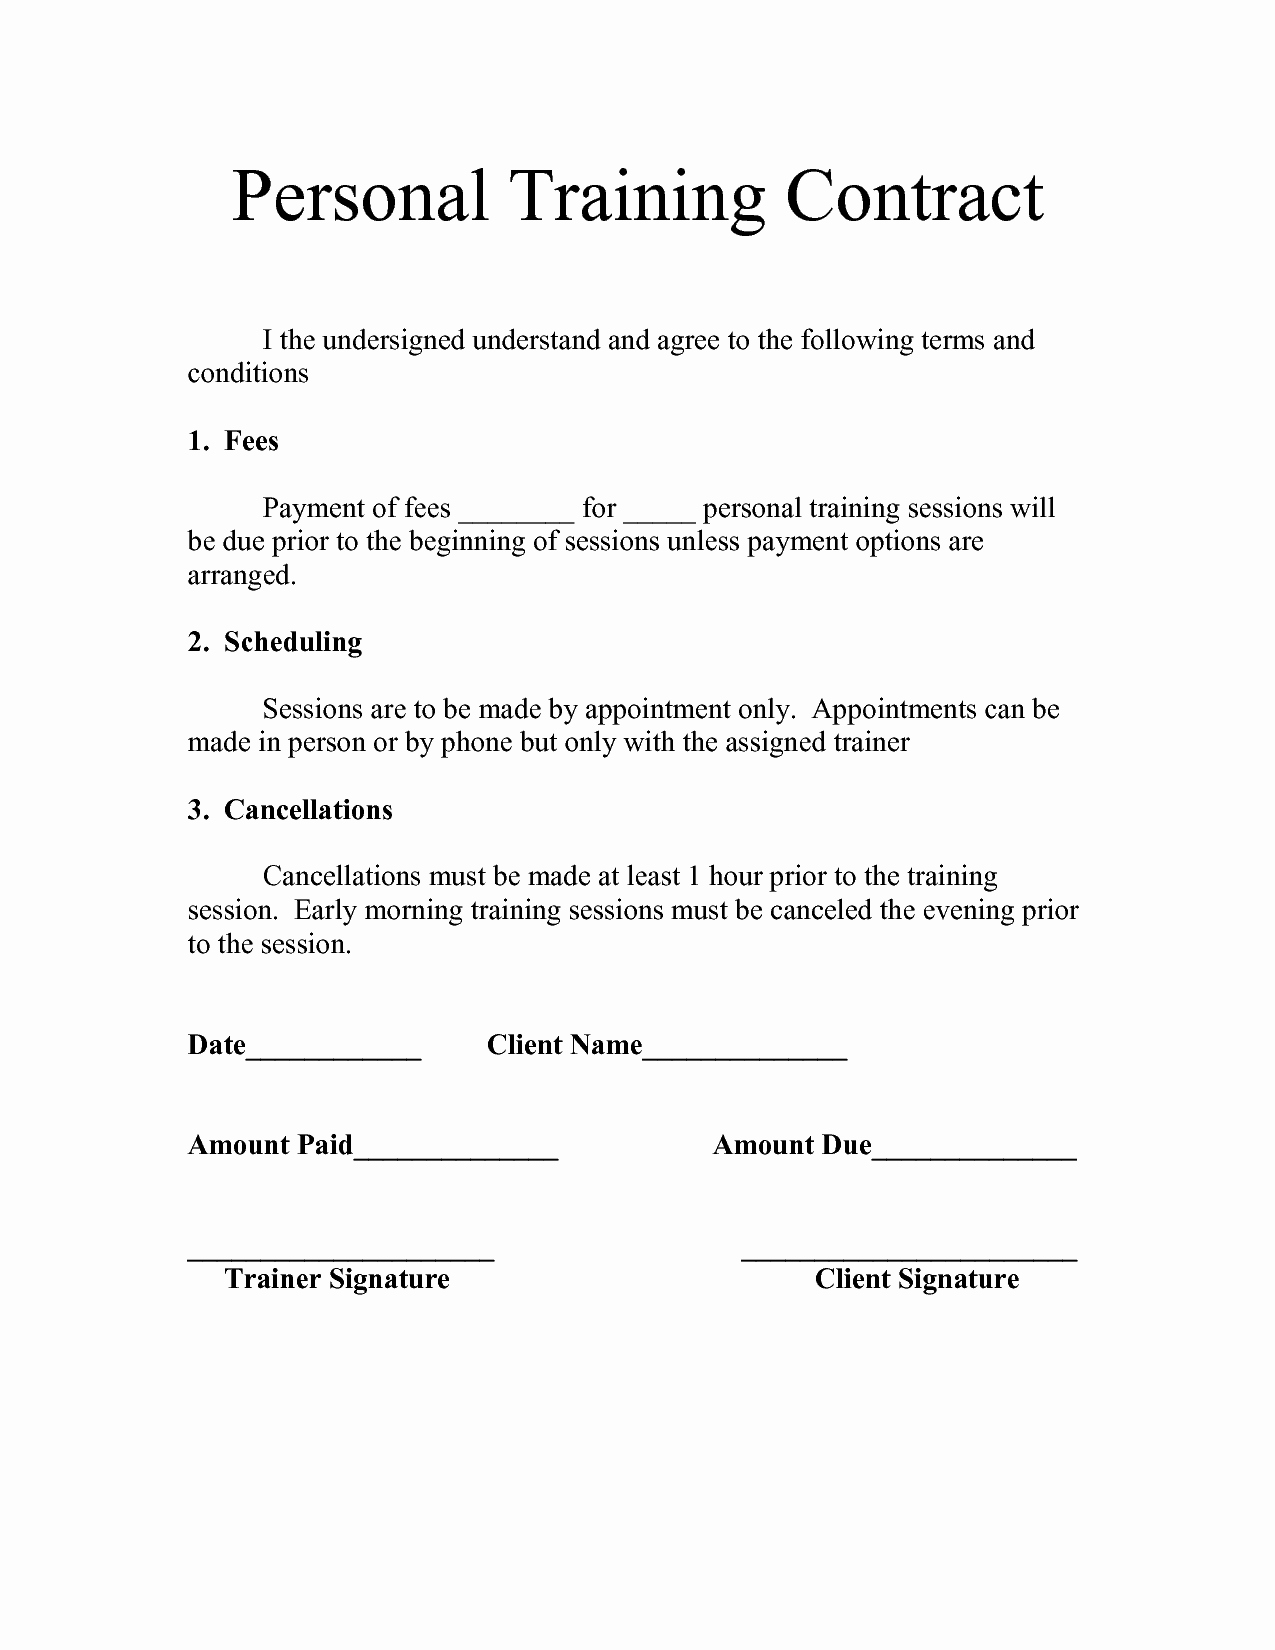 Personal Trainer Waiver form Template Luxury Personal Training Contract Templates